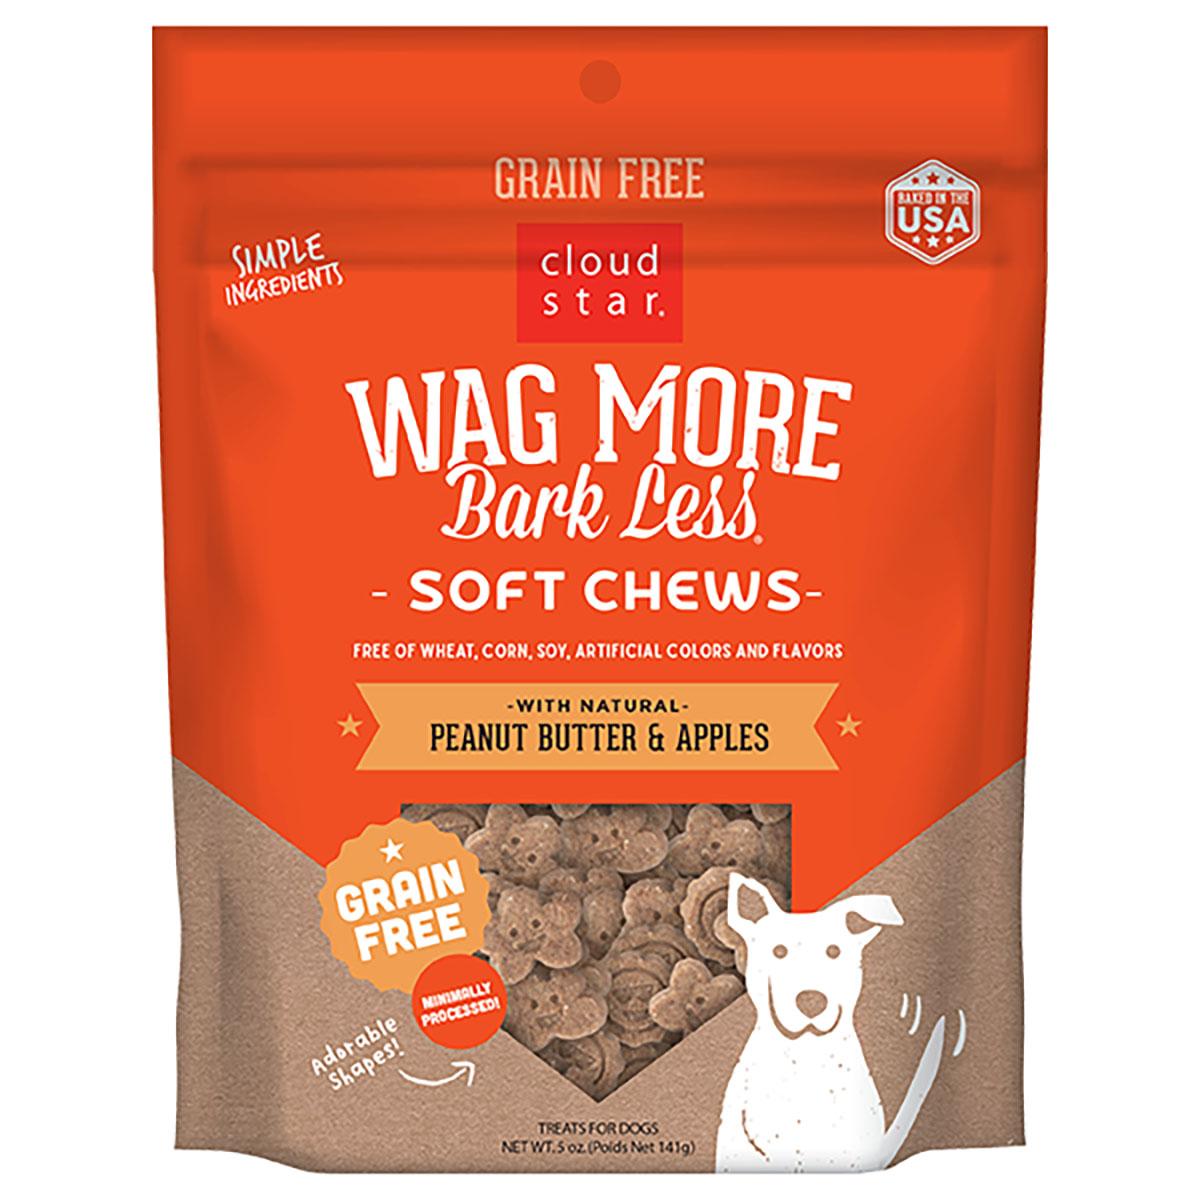 Cloud Star Wag More Bark Less Grain-Free Soft & Chewy Treats - Peanut Butter & Apples